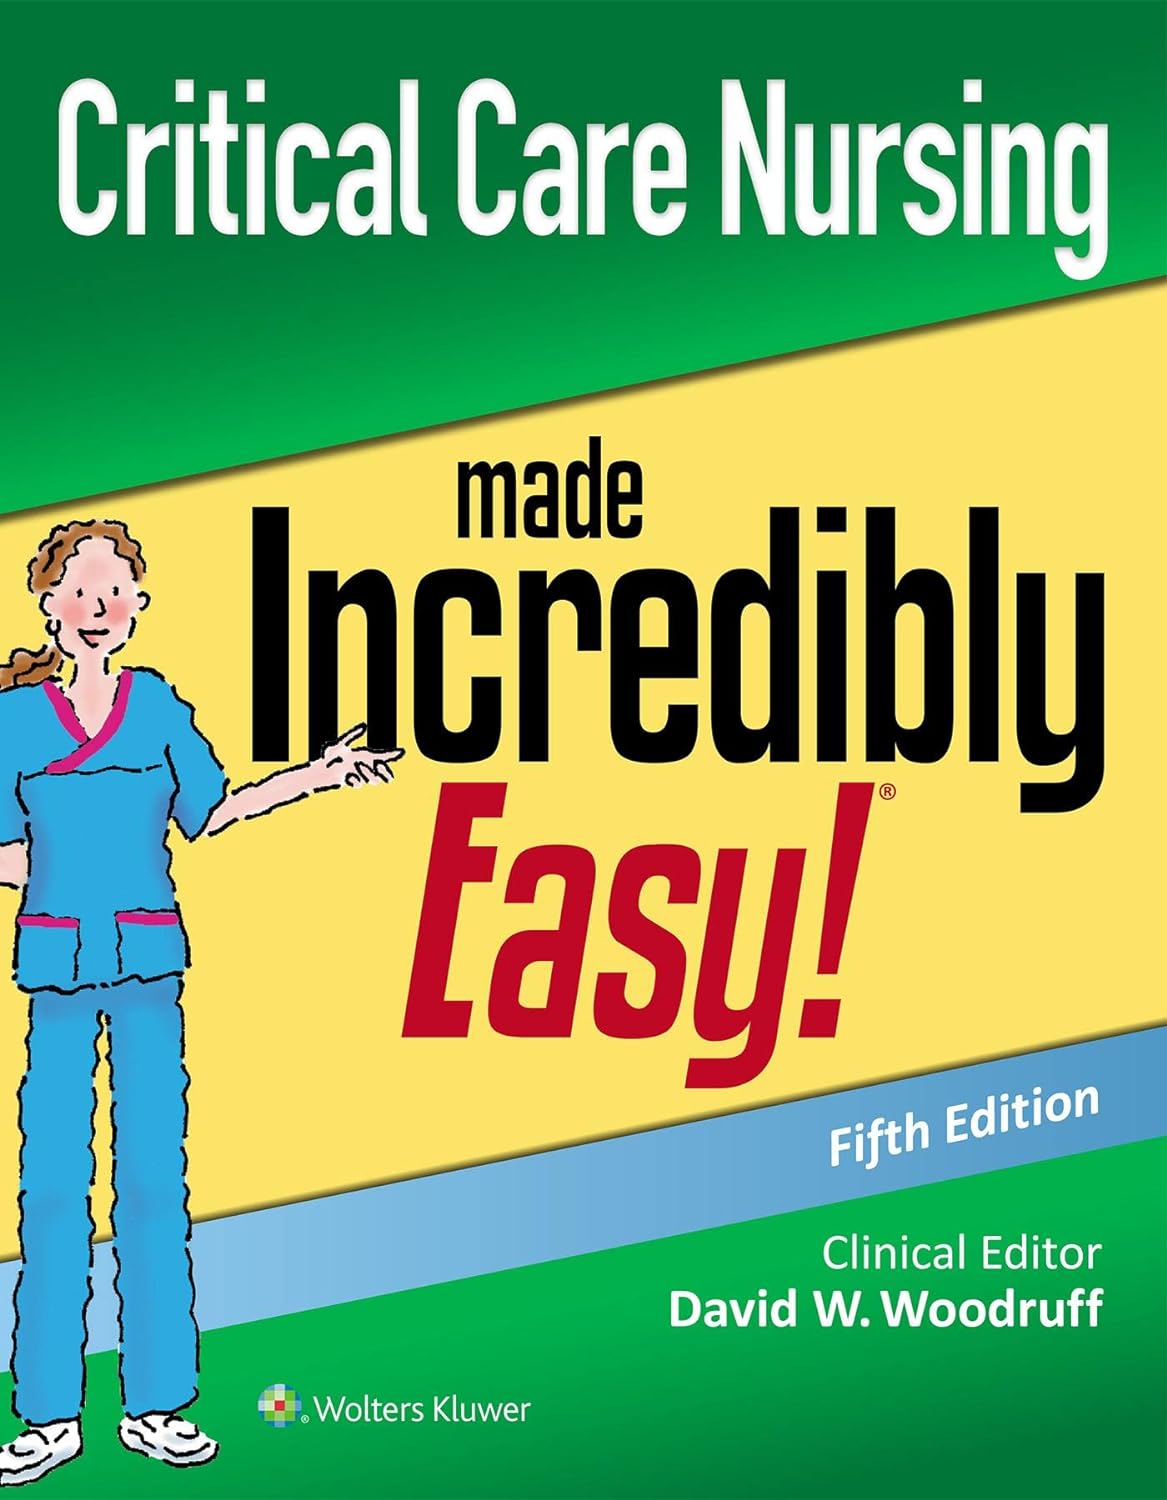 Critical Care Nursing Made Incredibly Easy! (Incredibly Easy! Series), 4th Edition  by  David W. Woodruff MSN RN-BC CNS CNE FNA